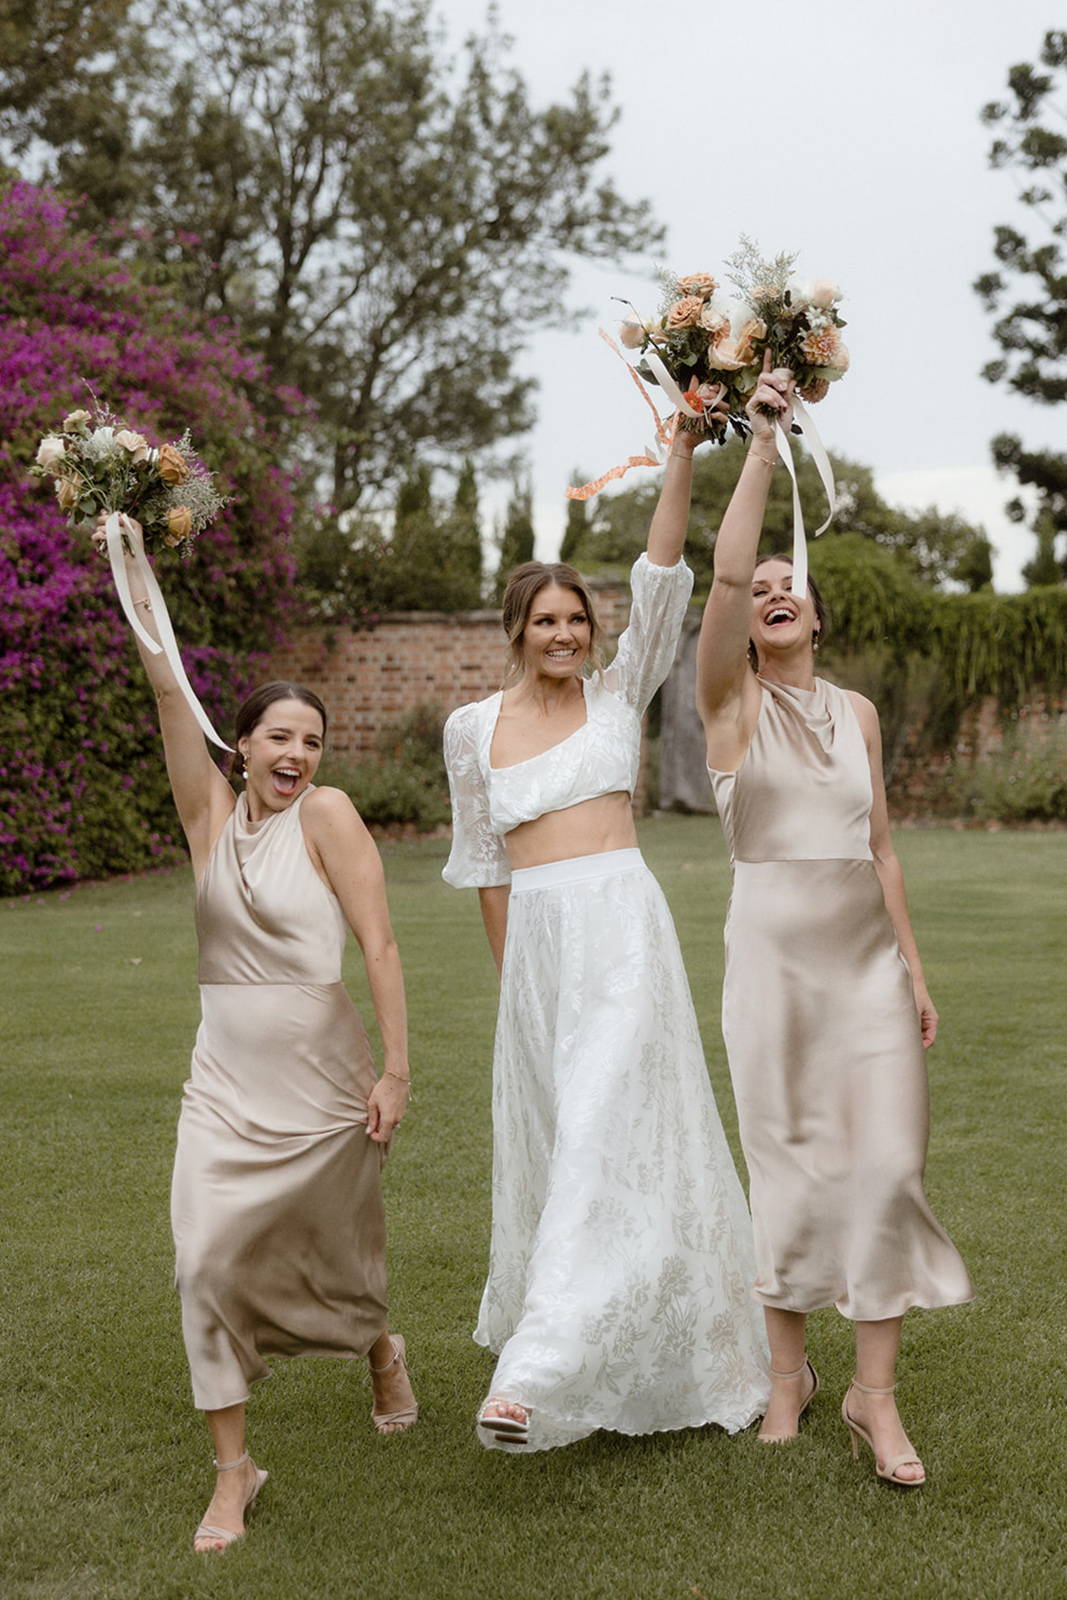 Bride and her bridesmaids holding their flower bouquets in the air